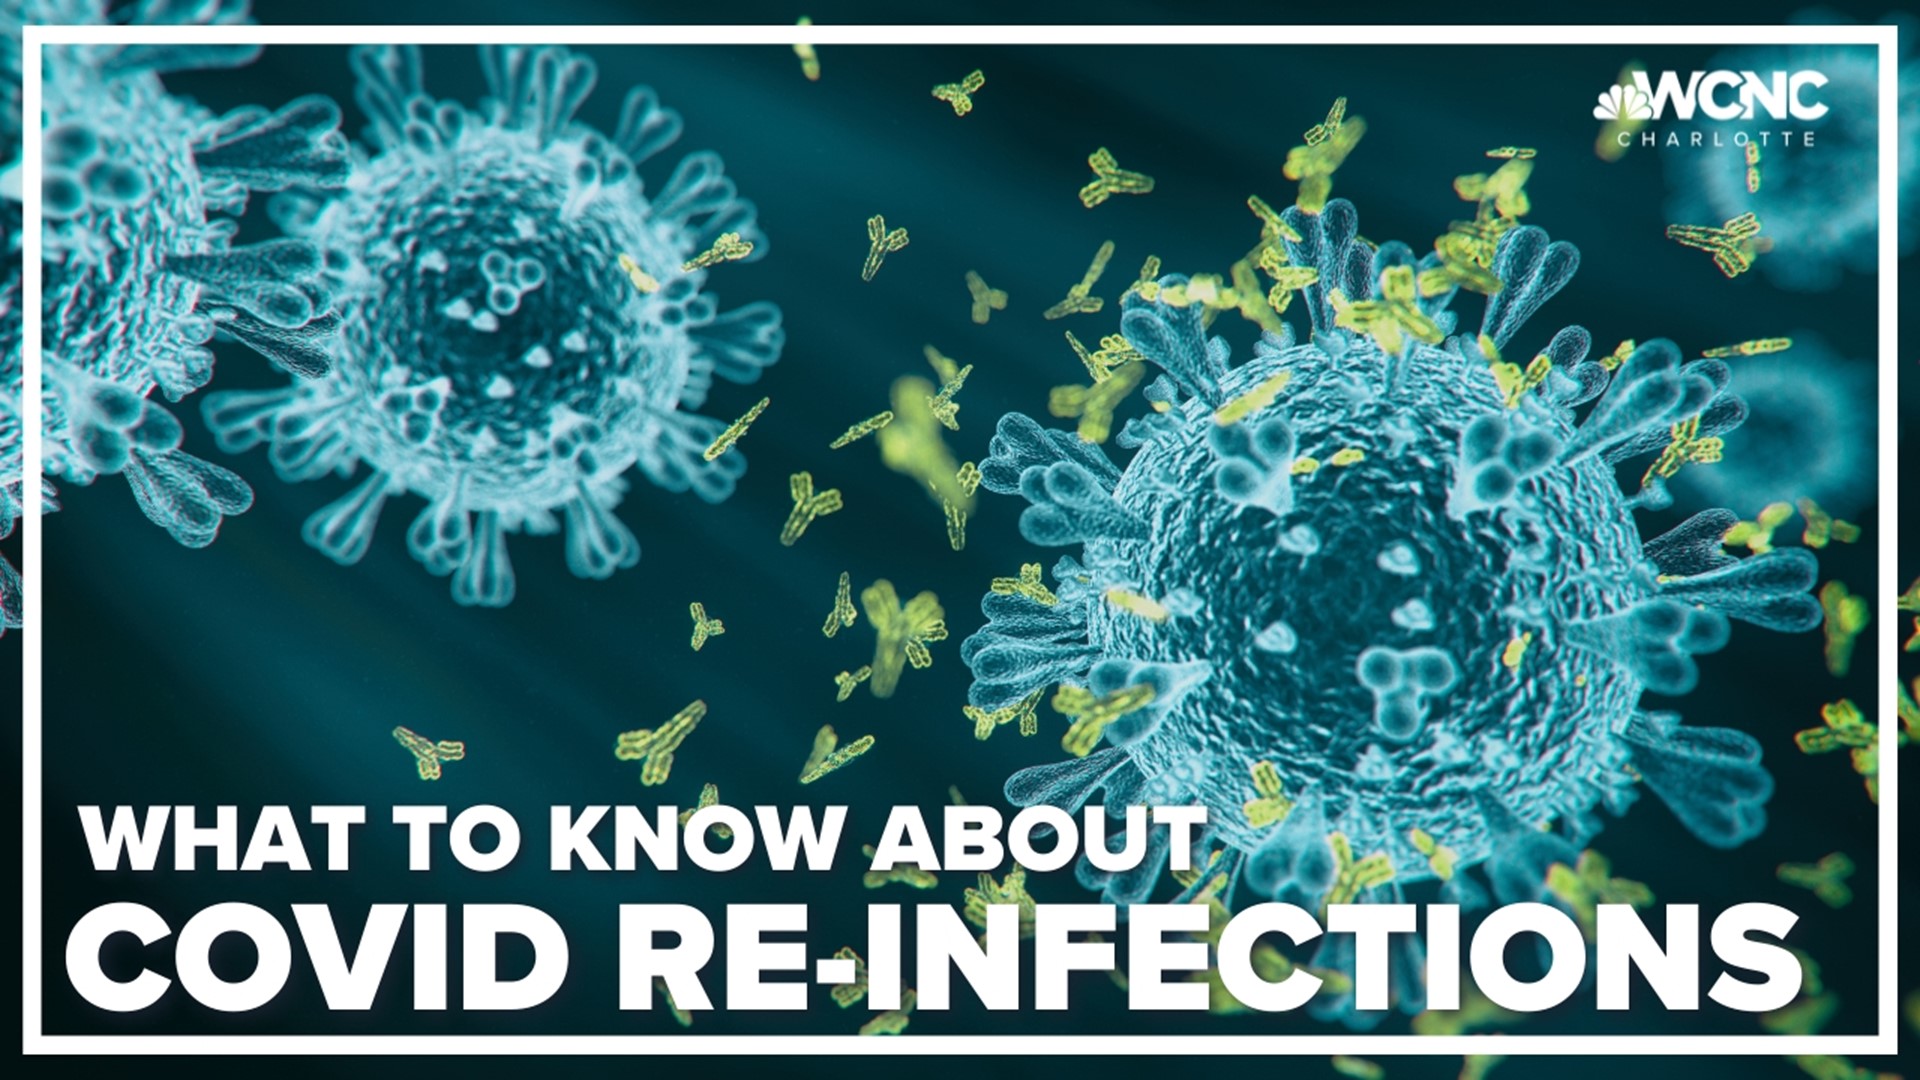 Data shows reinfections are most commonly the BA.5 subvariant.